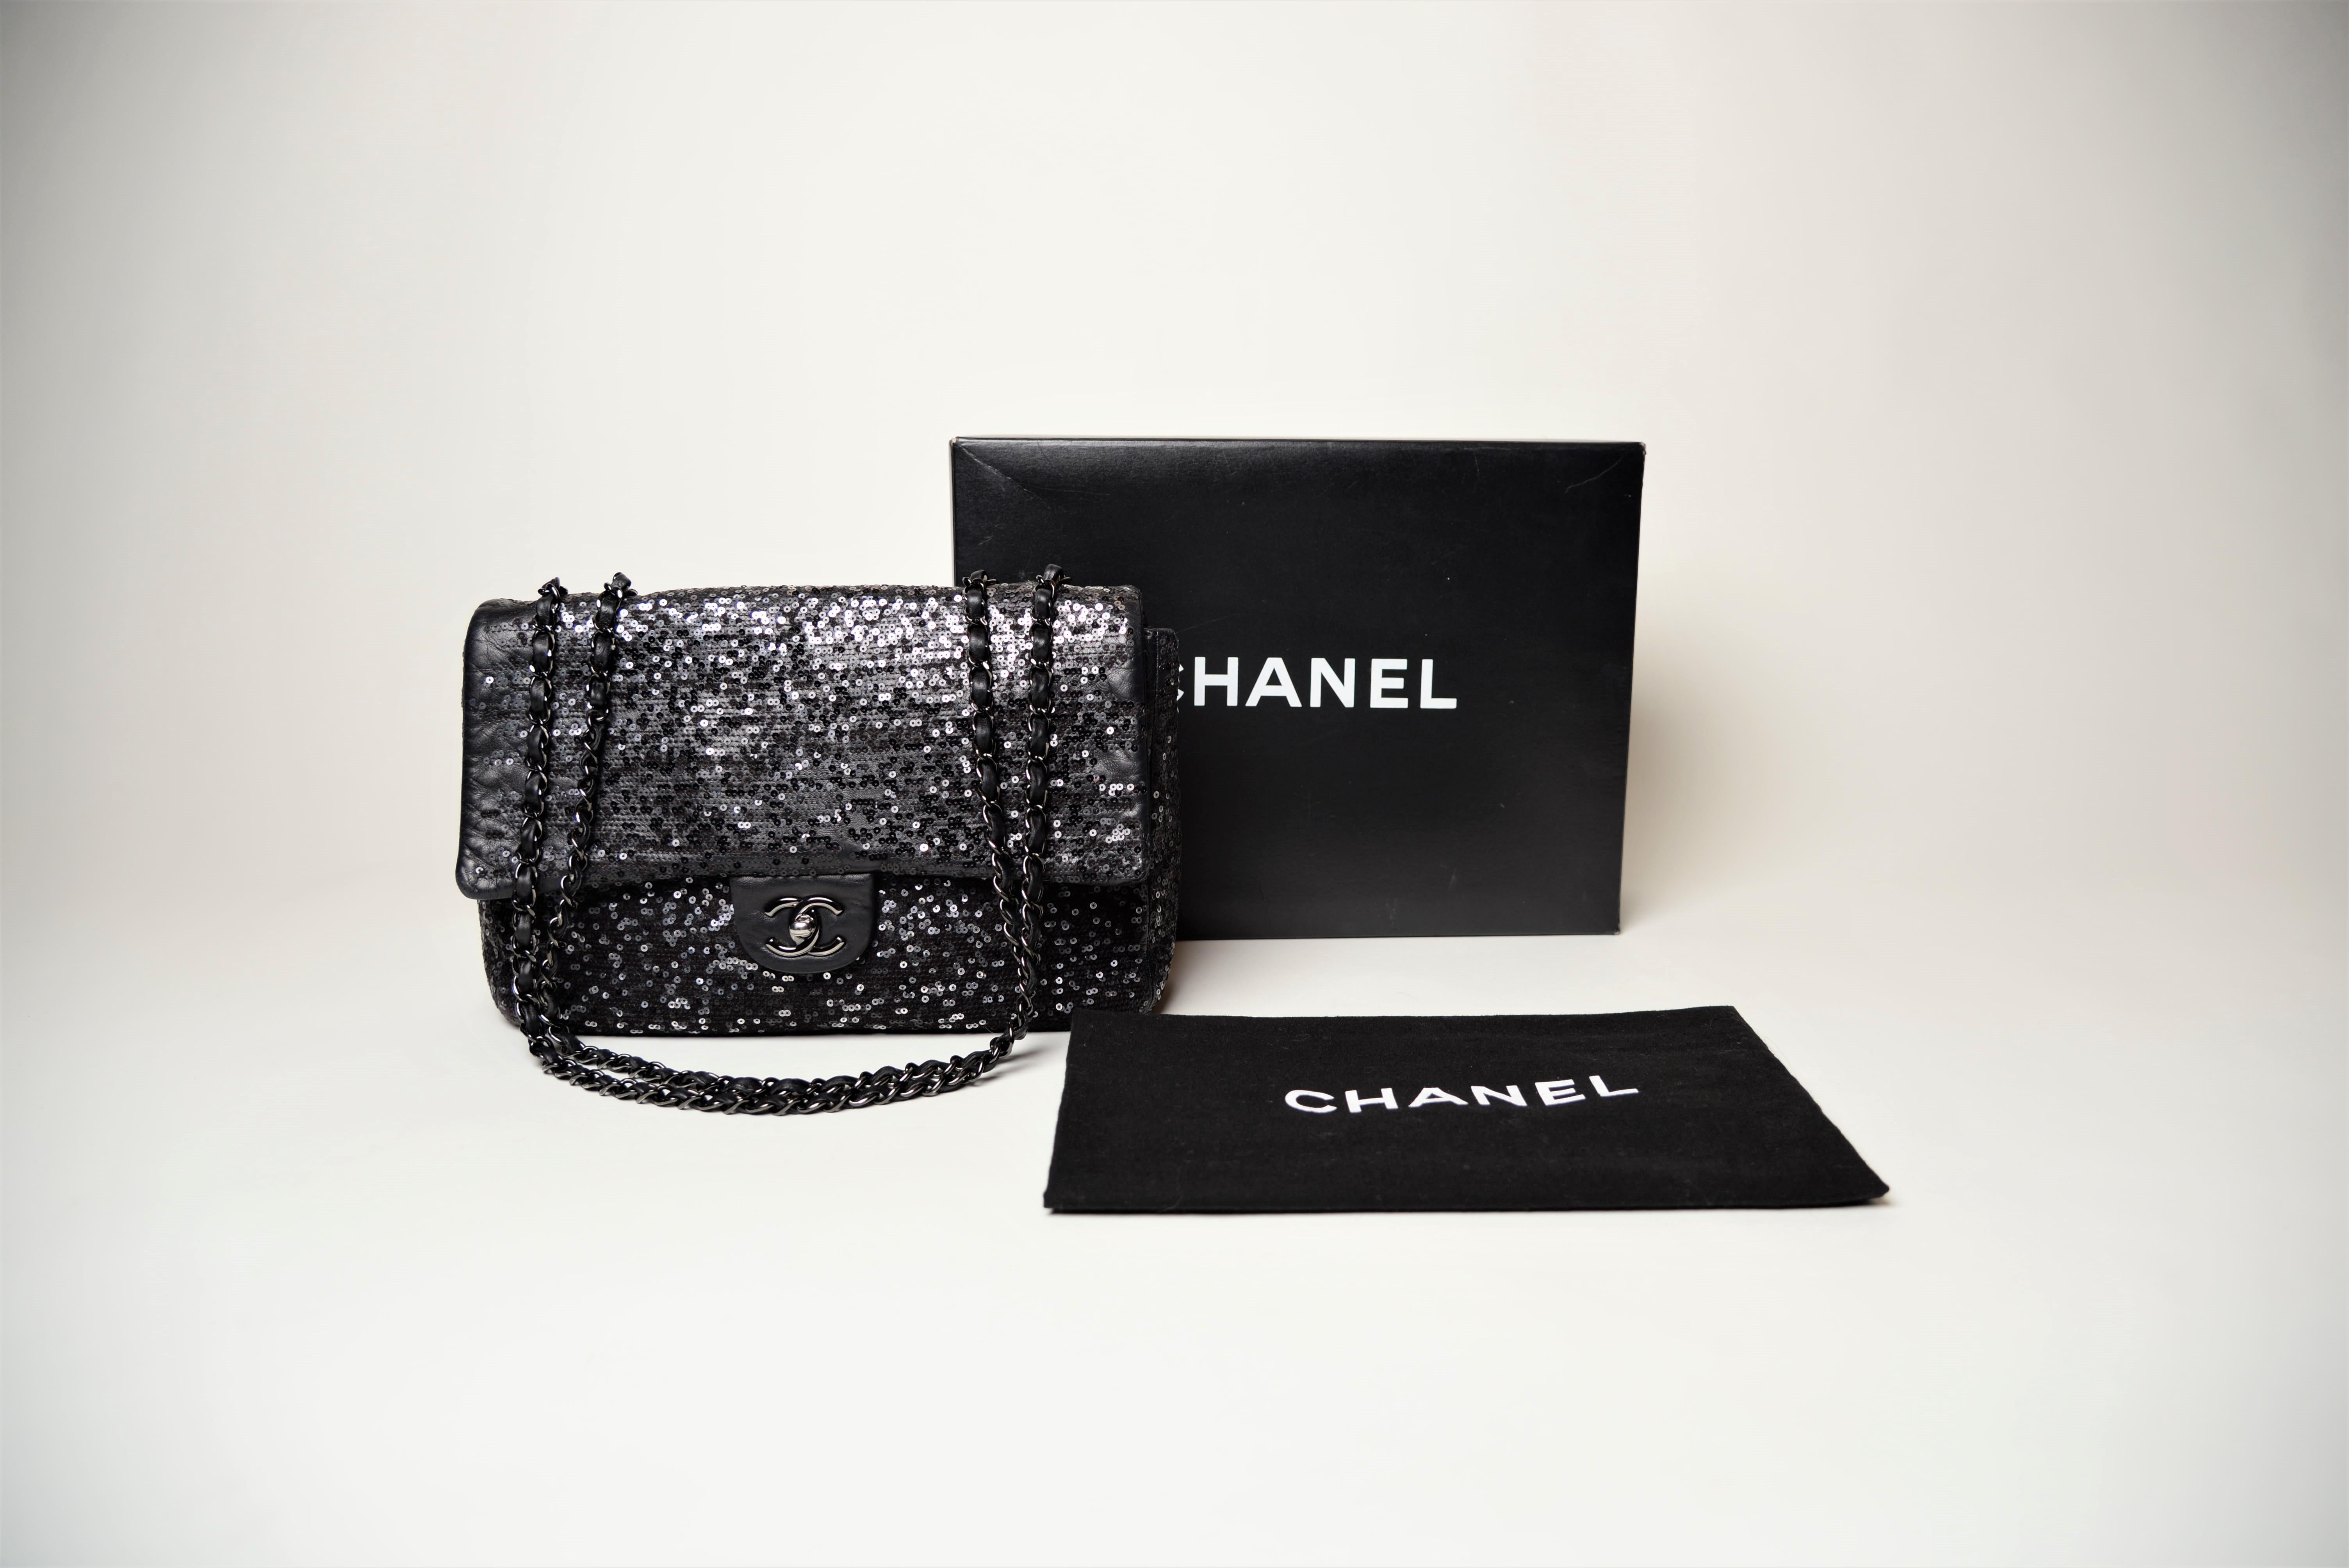 From the collection of SAVINETI we offer this Chanel Sequins Jumbo Flap Bag :
-	Brand: Chanel
-	Model: Jumbo; Moonlight on Water collection
-	Year: 2011
-	Code: 15316893
-	Condition: Good
-	Materials: Sequins & Lambskin Leather
-	Extras: Dustbag &